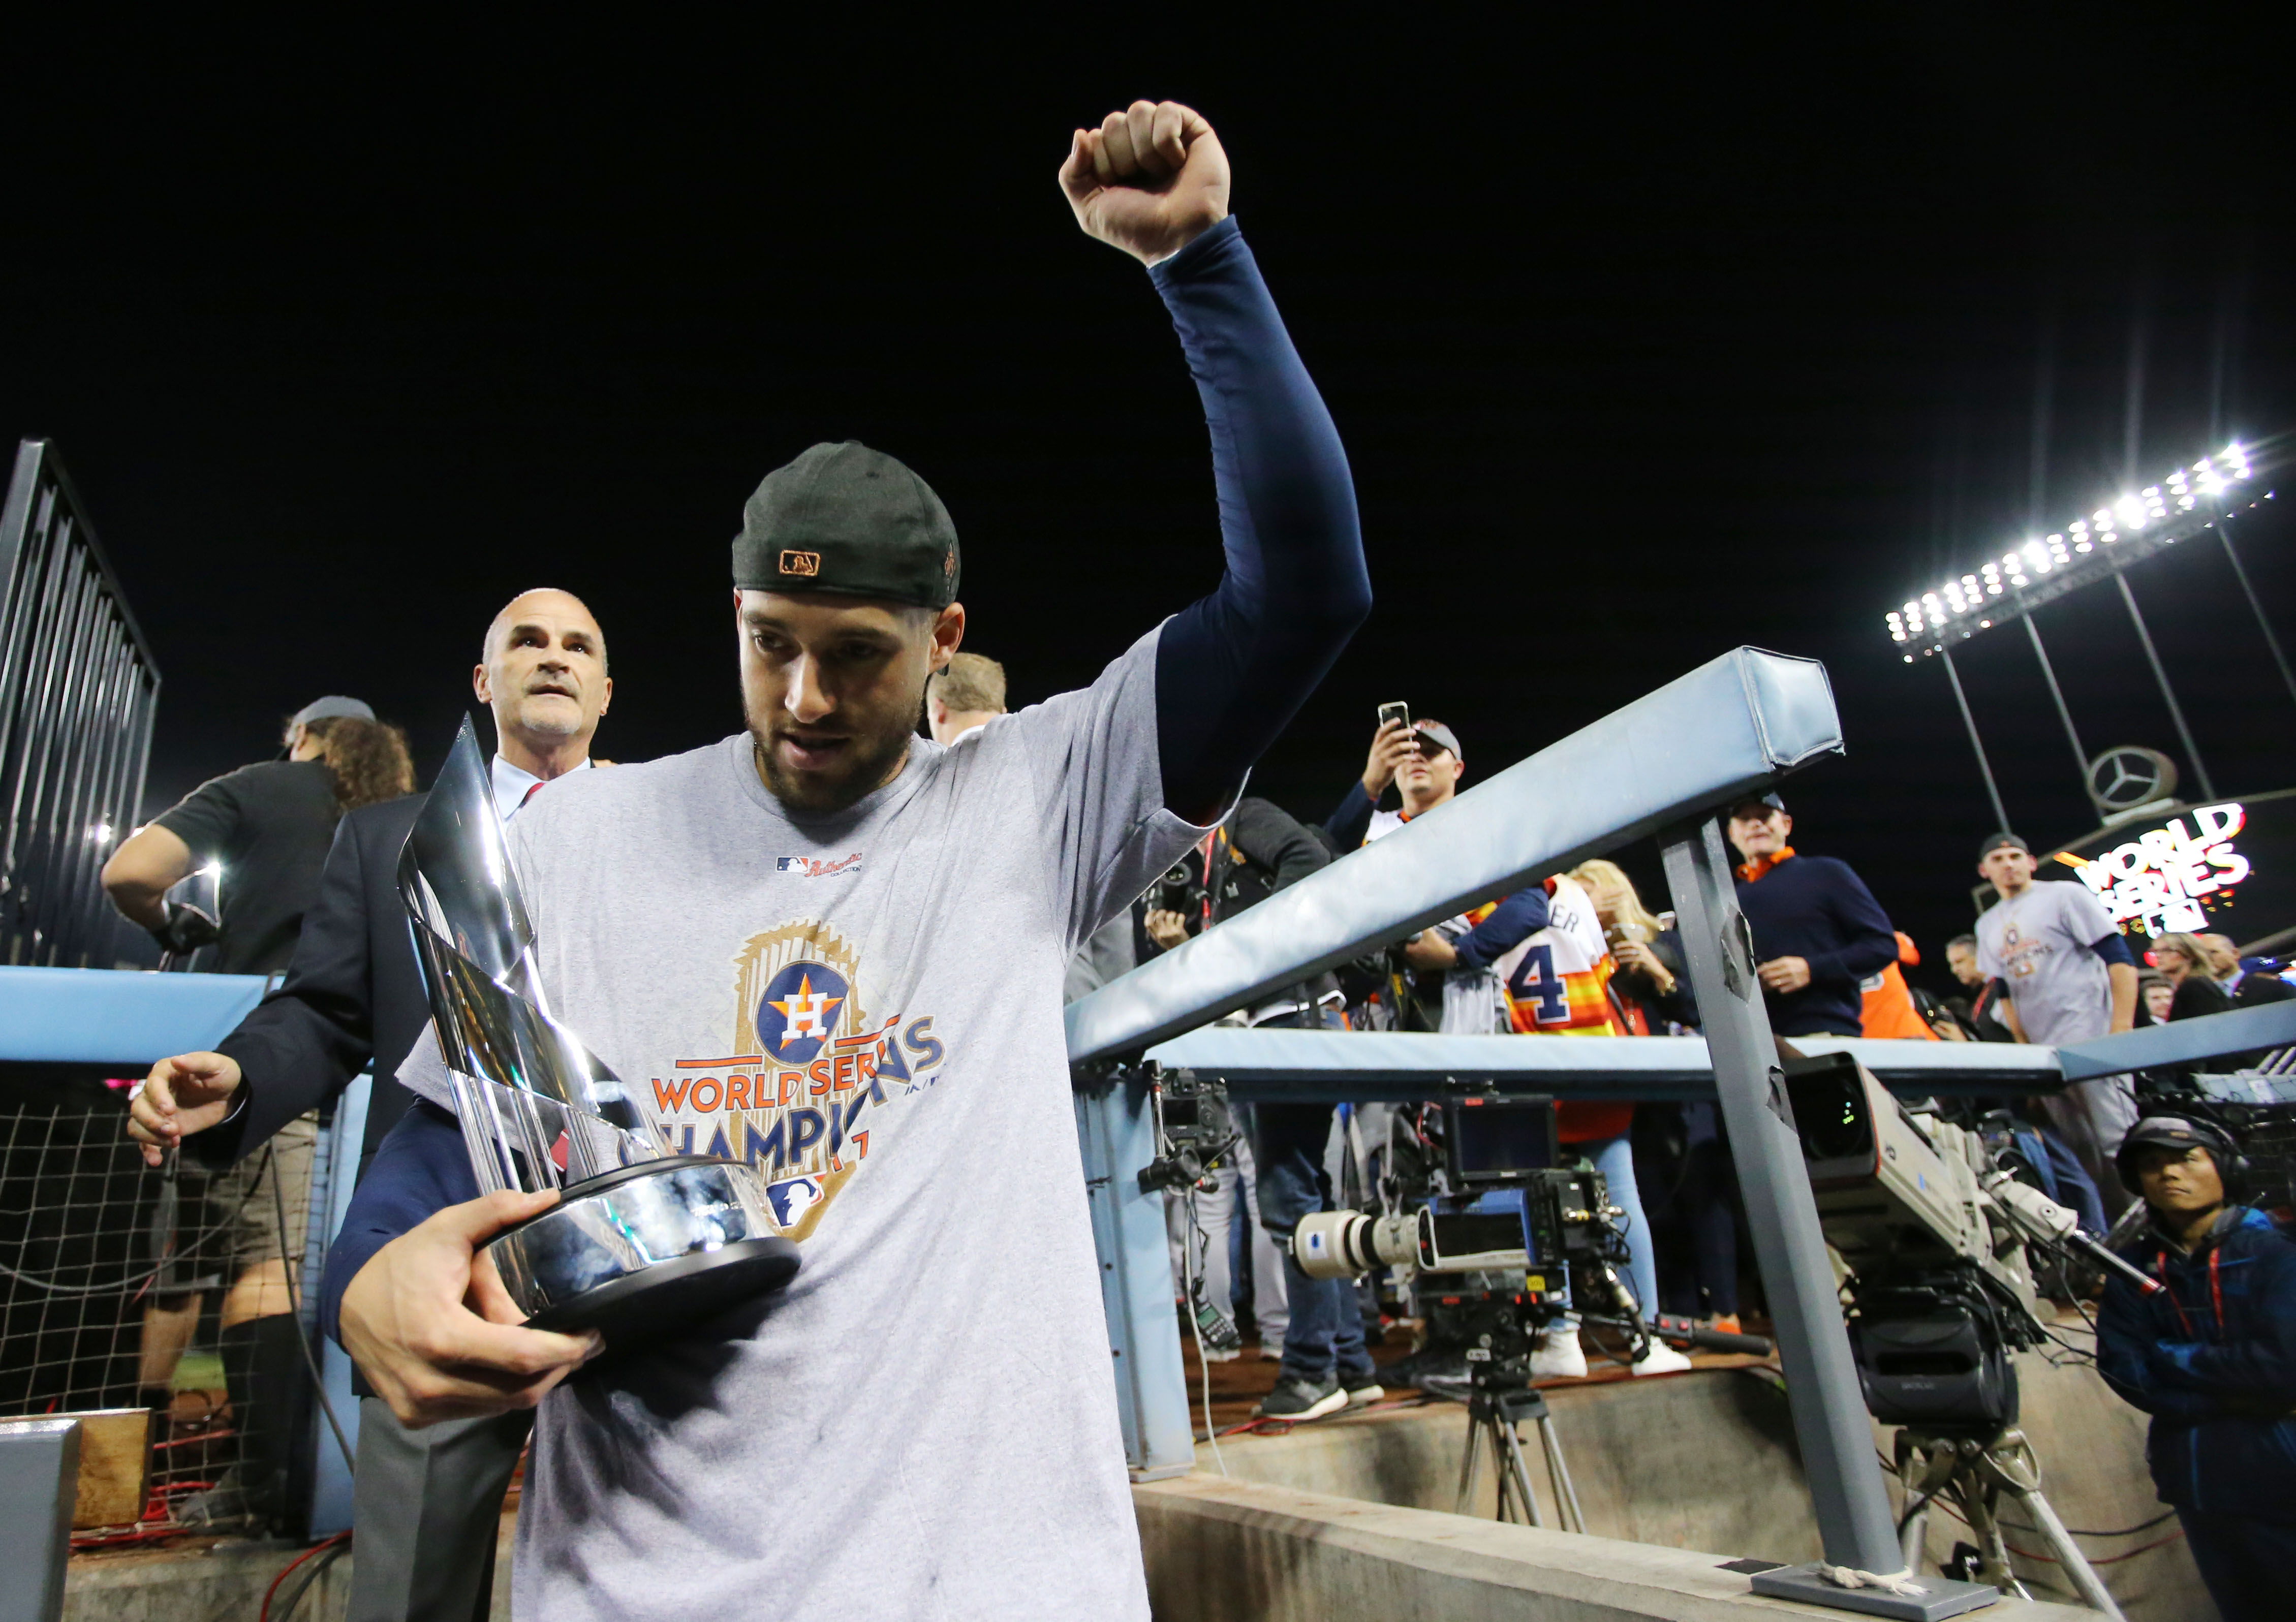 Bottoms up: Astros and MVP Springer complete stunning rise, win World Series